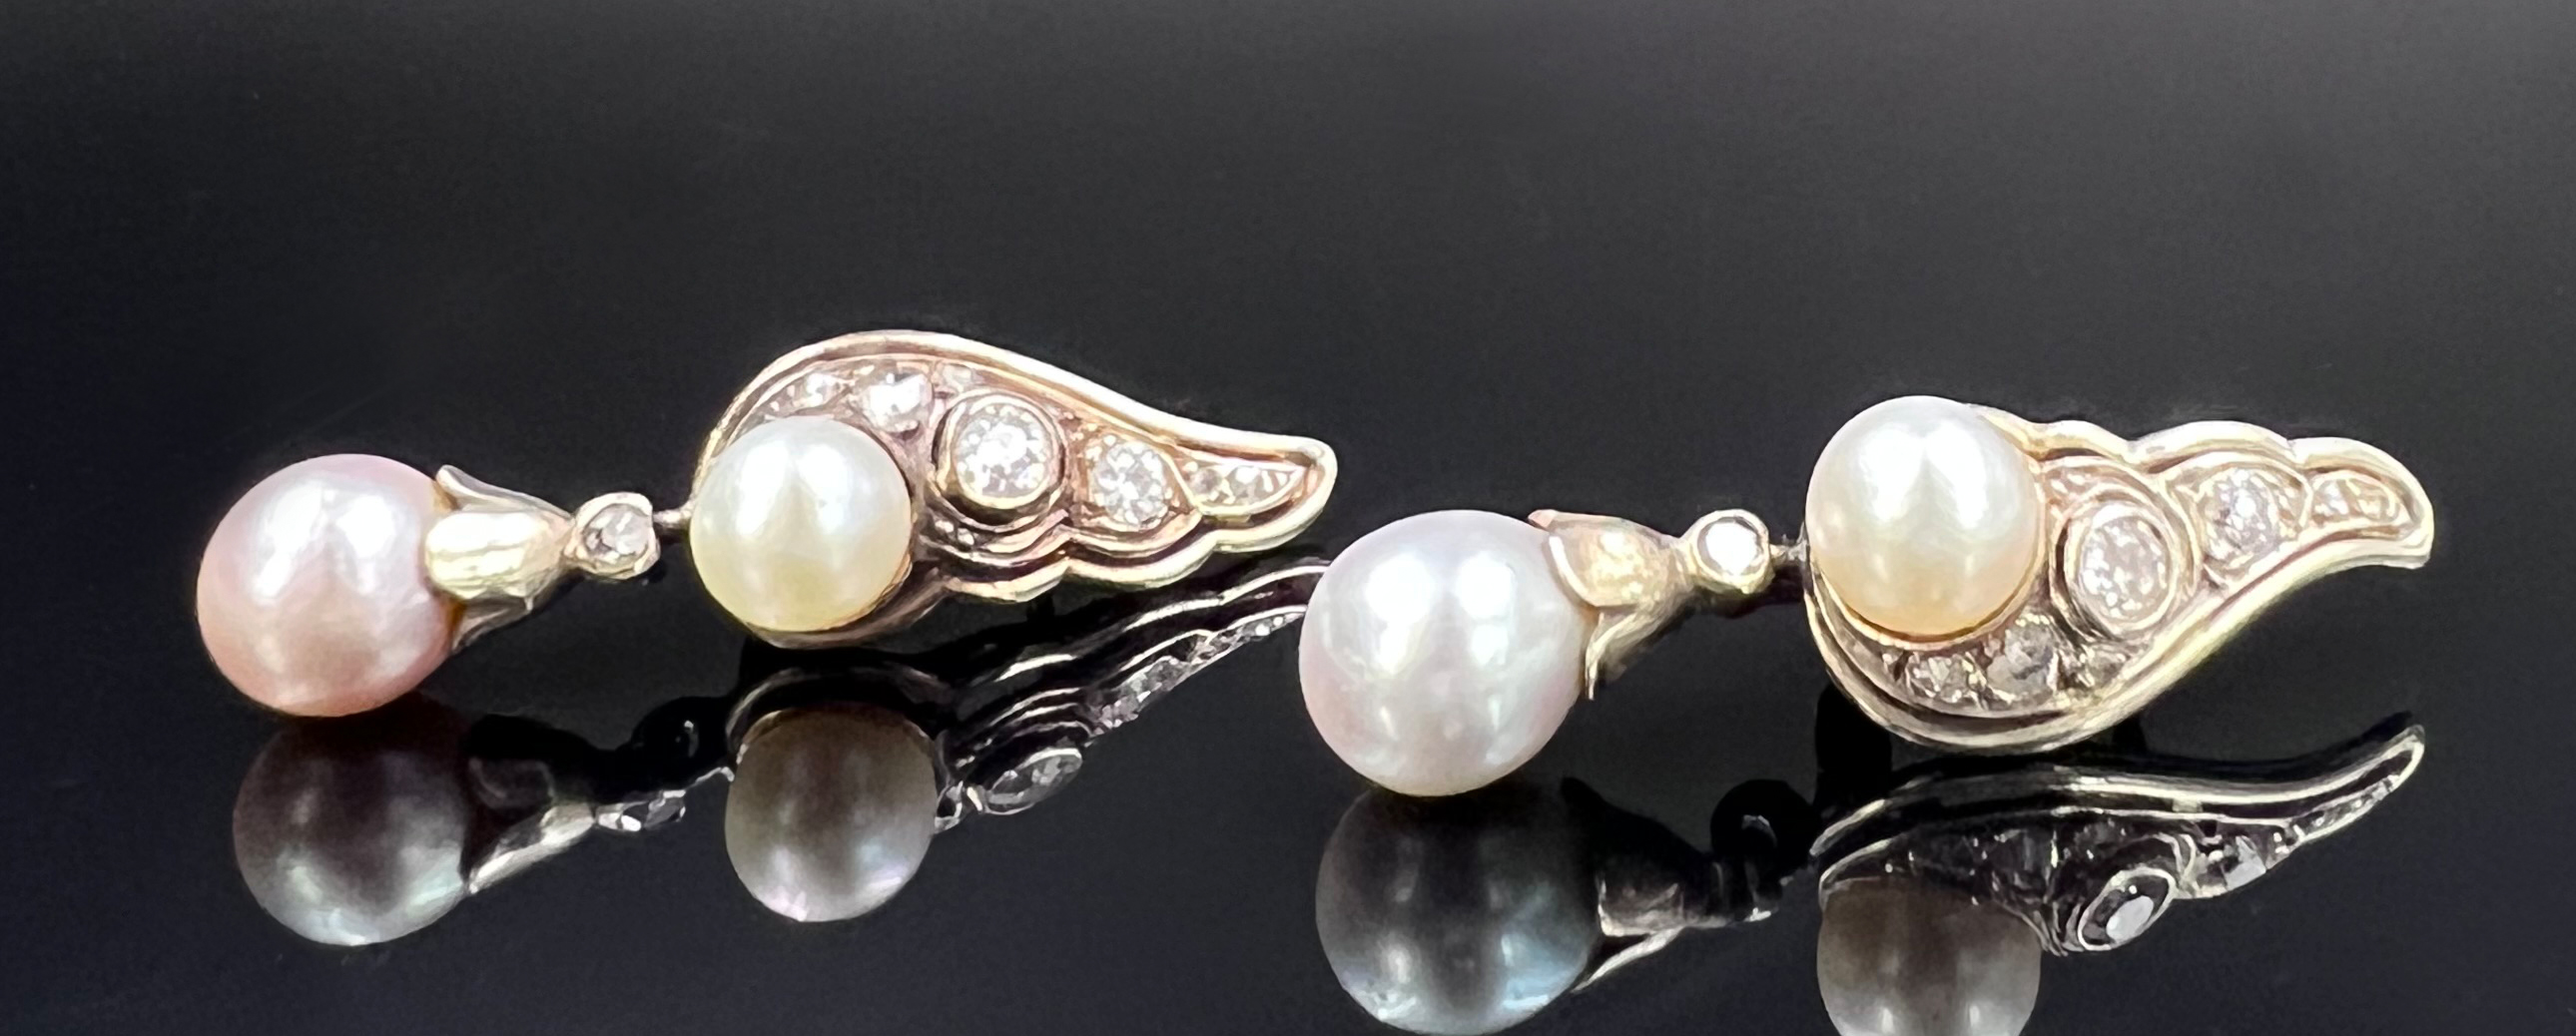 Pair of earrings. 585 white gold and silver with diamonds and pearls. Art deco.